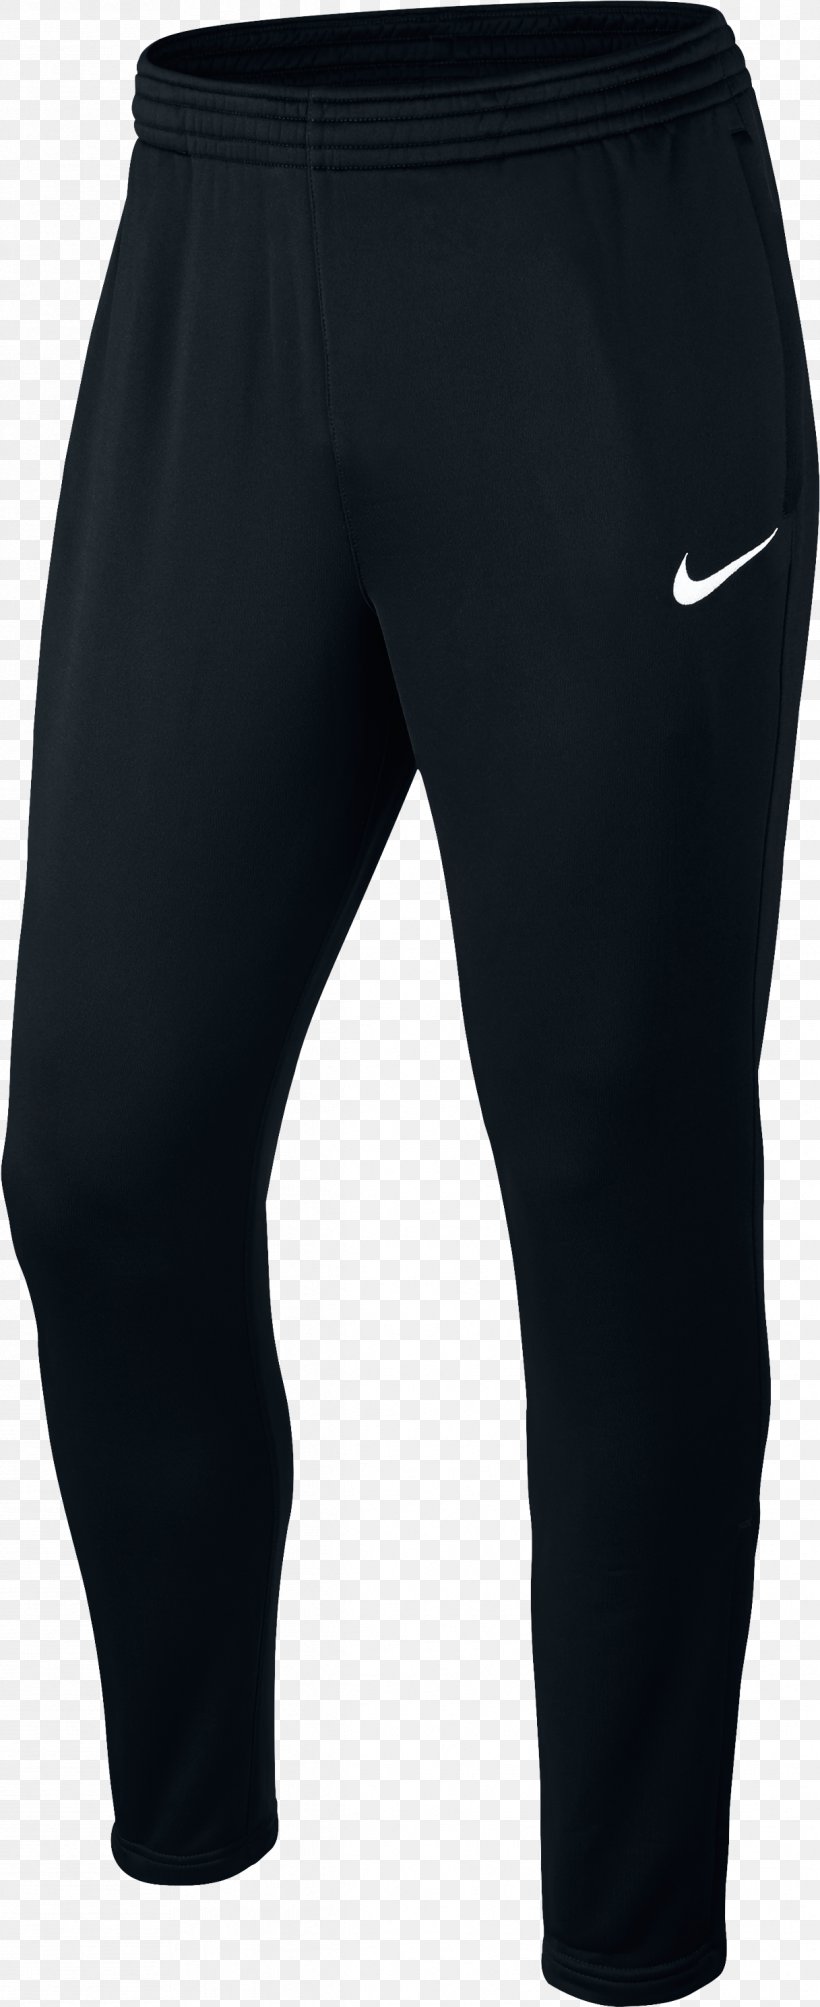 Nike Sweatpants Clothing Tights, PNG, 1217x2980px, Nike, Active Pants ...